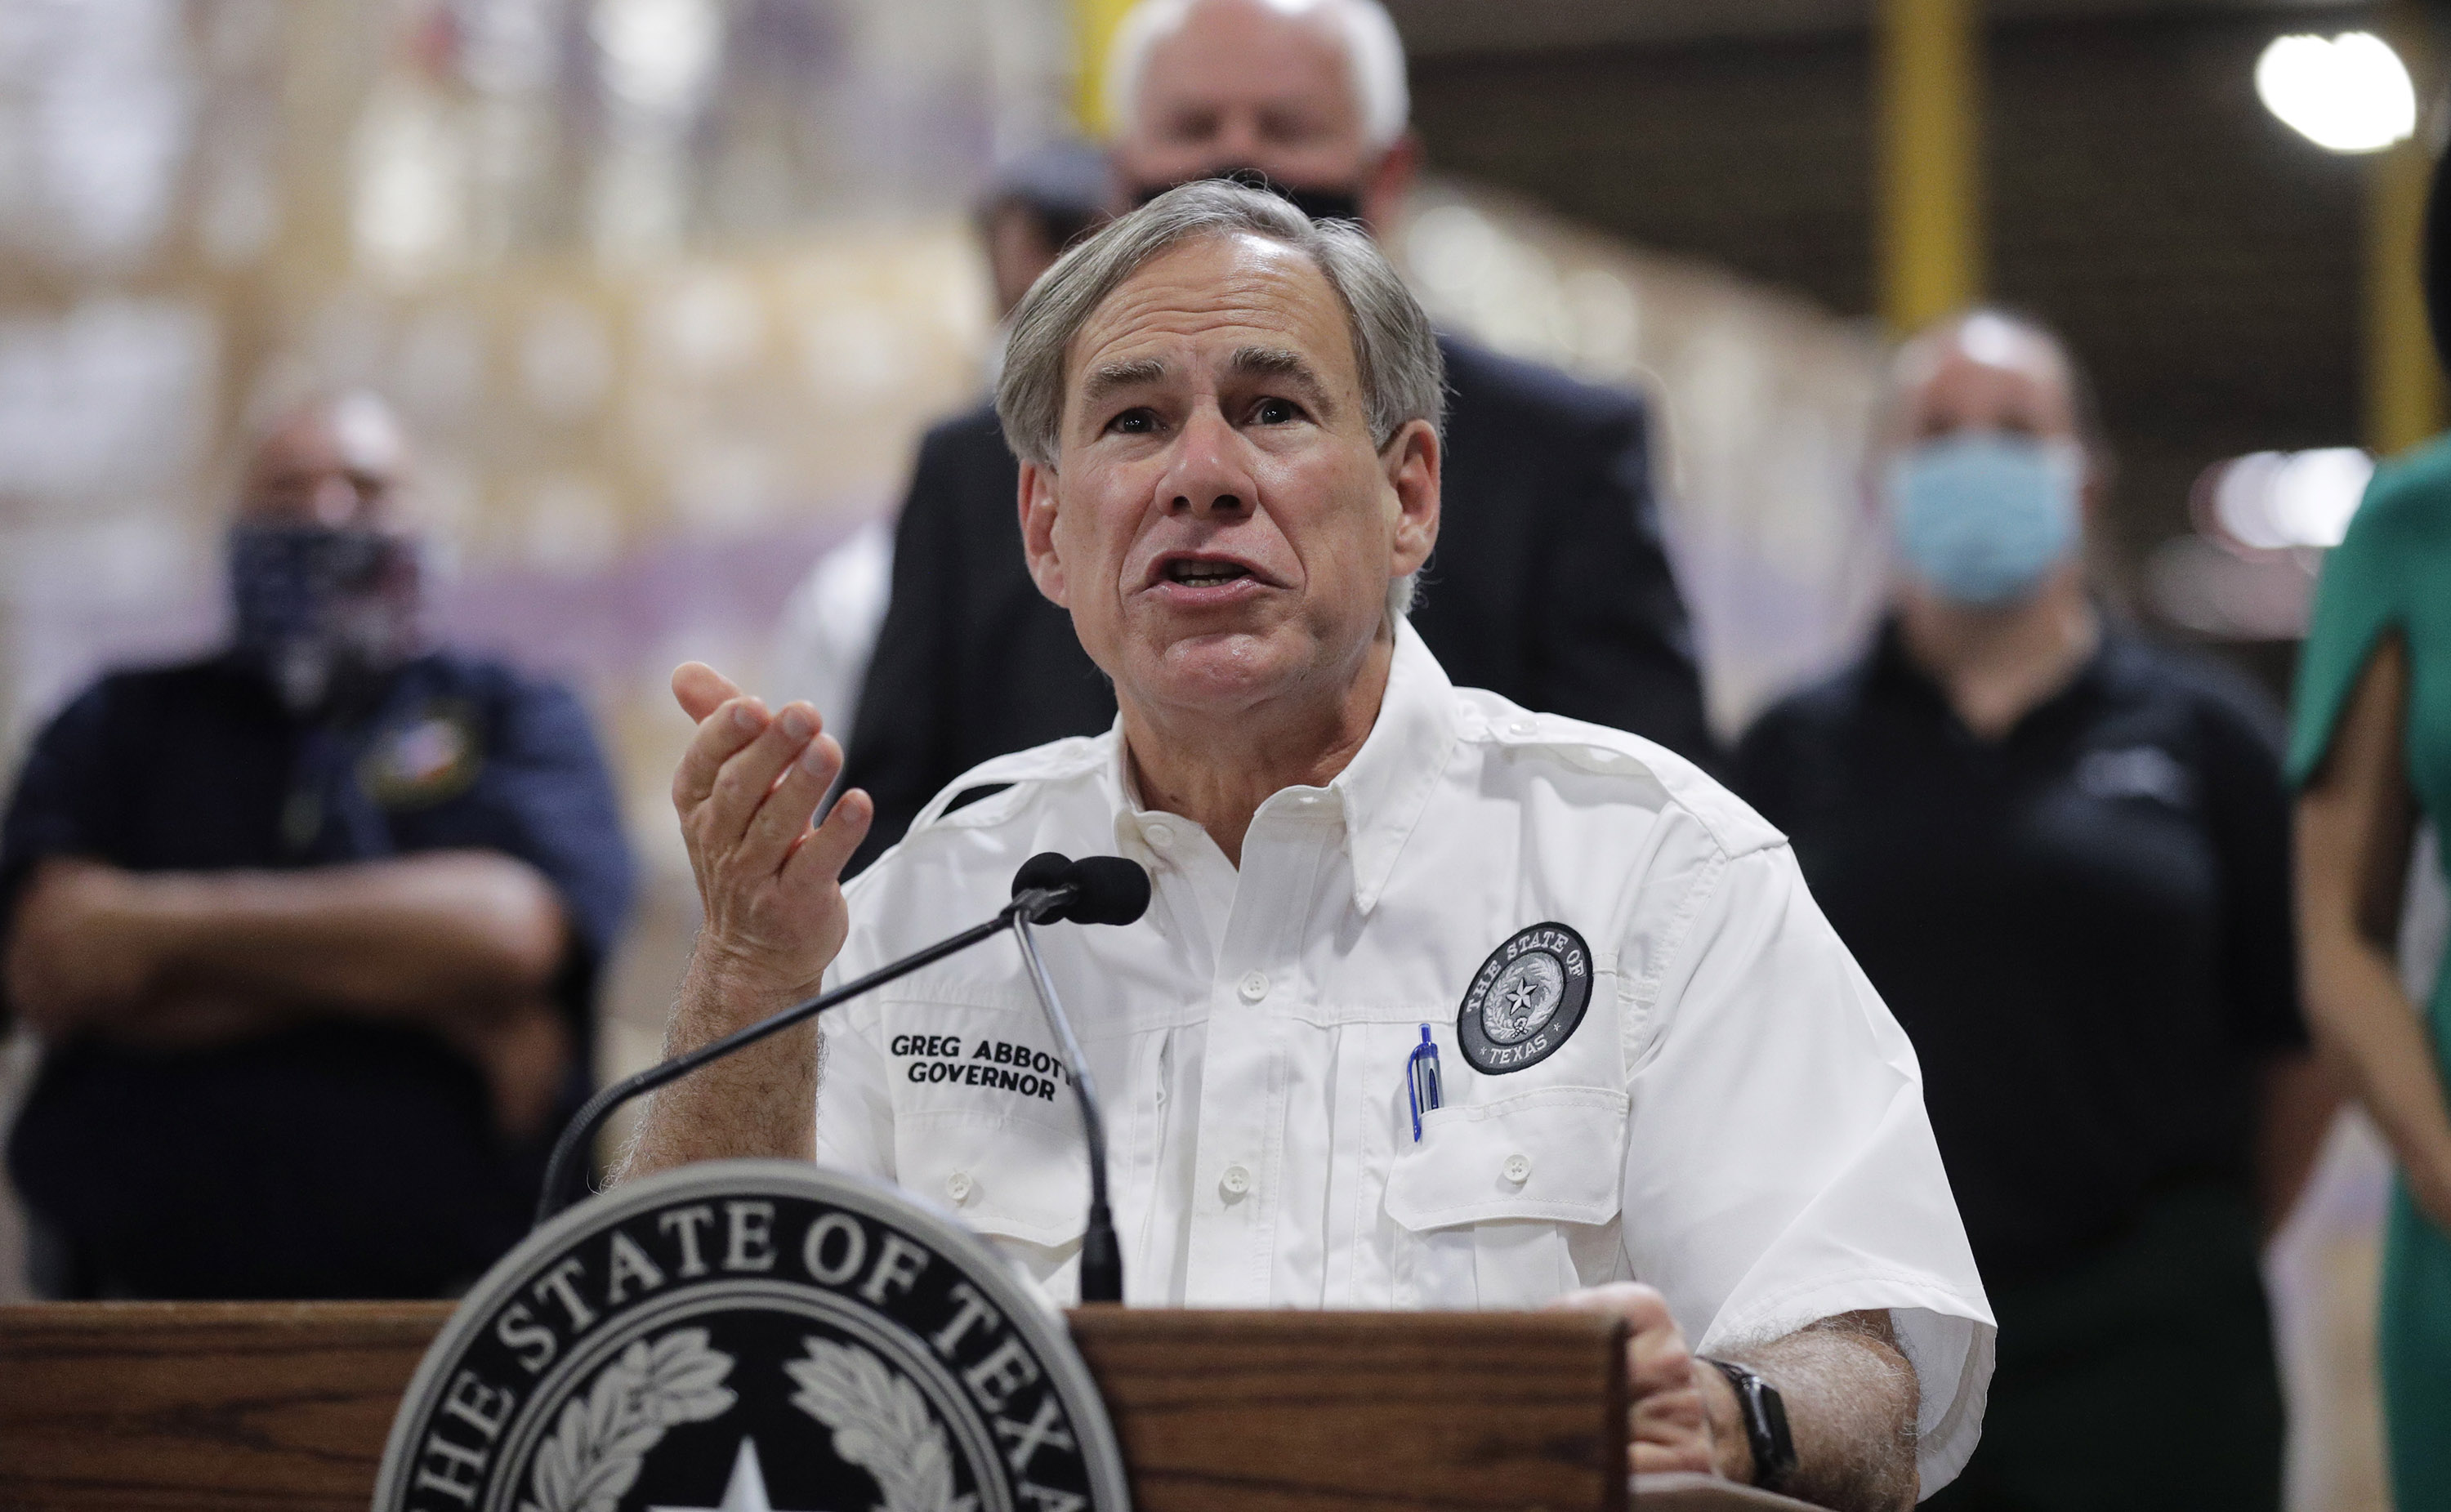 Gov. Greg Abbott speaks to the media during a visit to a Texas Division of Emergency Management Warehouse in San Antonio, Texas, on Tuesday, August 4. 